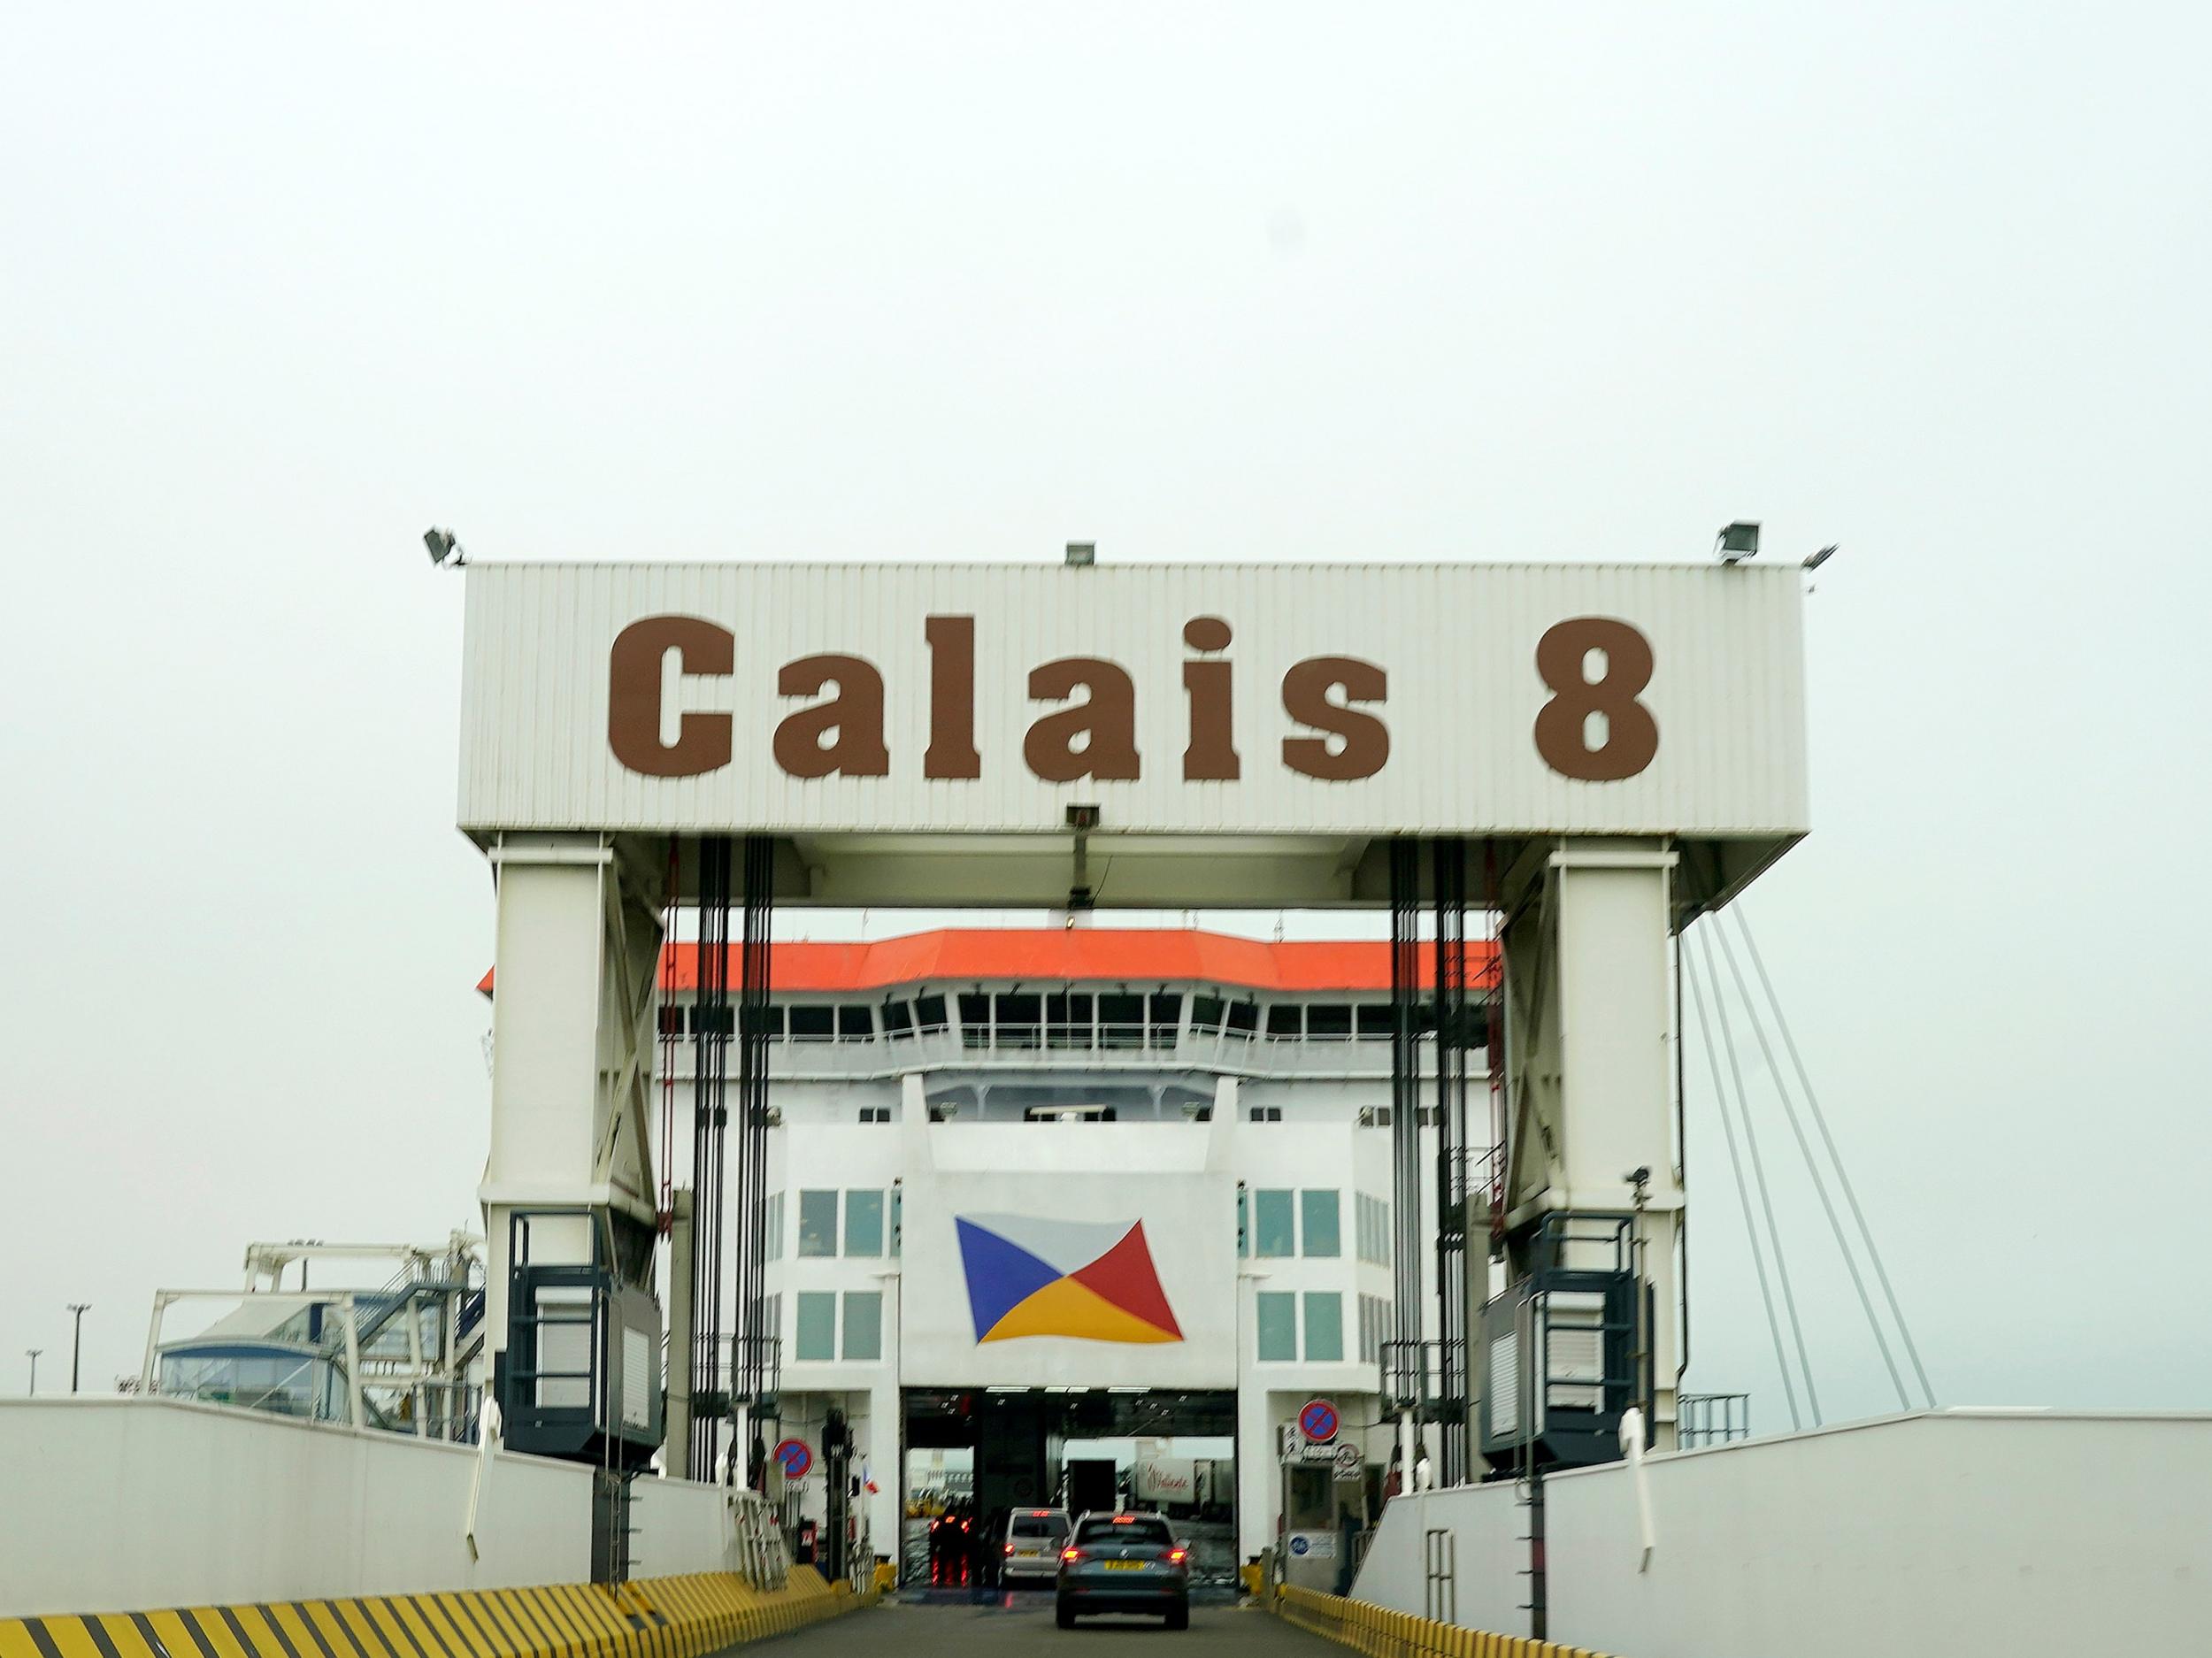 The Calais Ferry terminal in France is preparing for increased traffic on Friday as people rush to avoid new quarantine rules